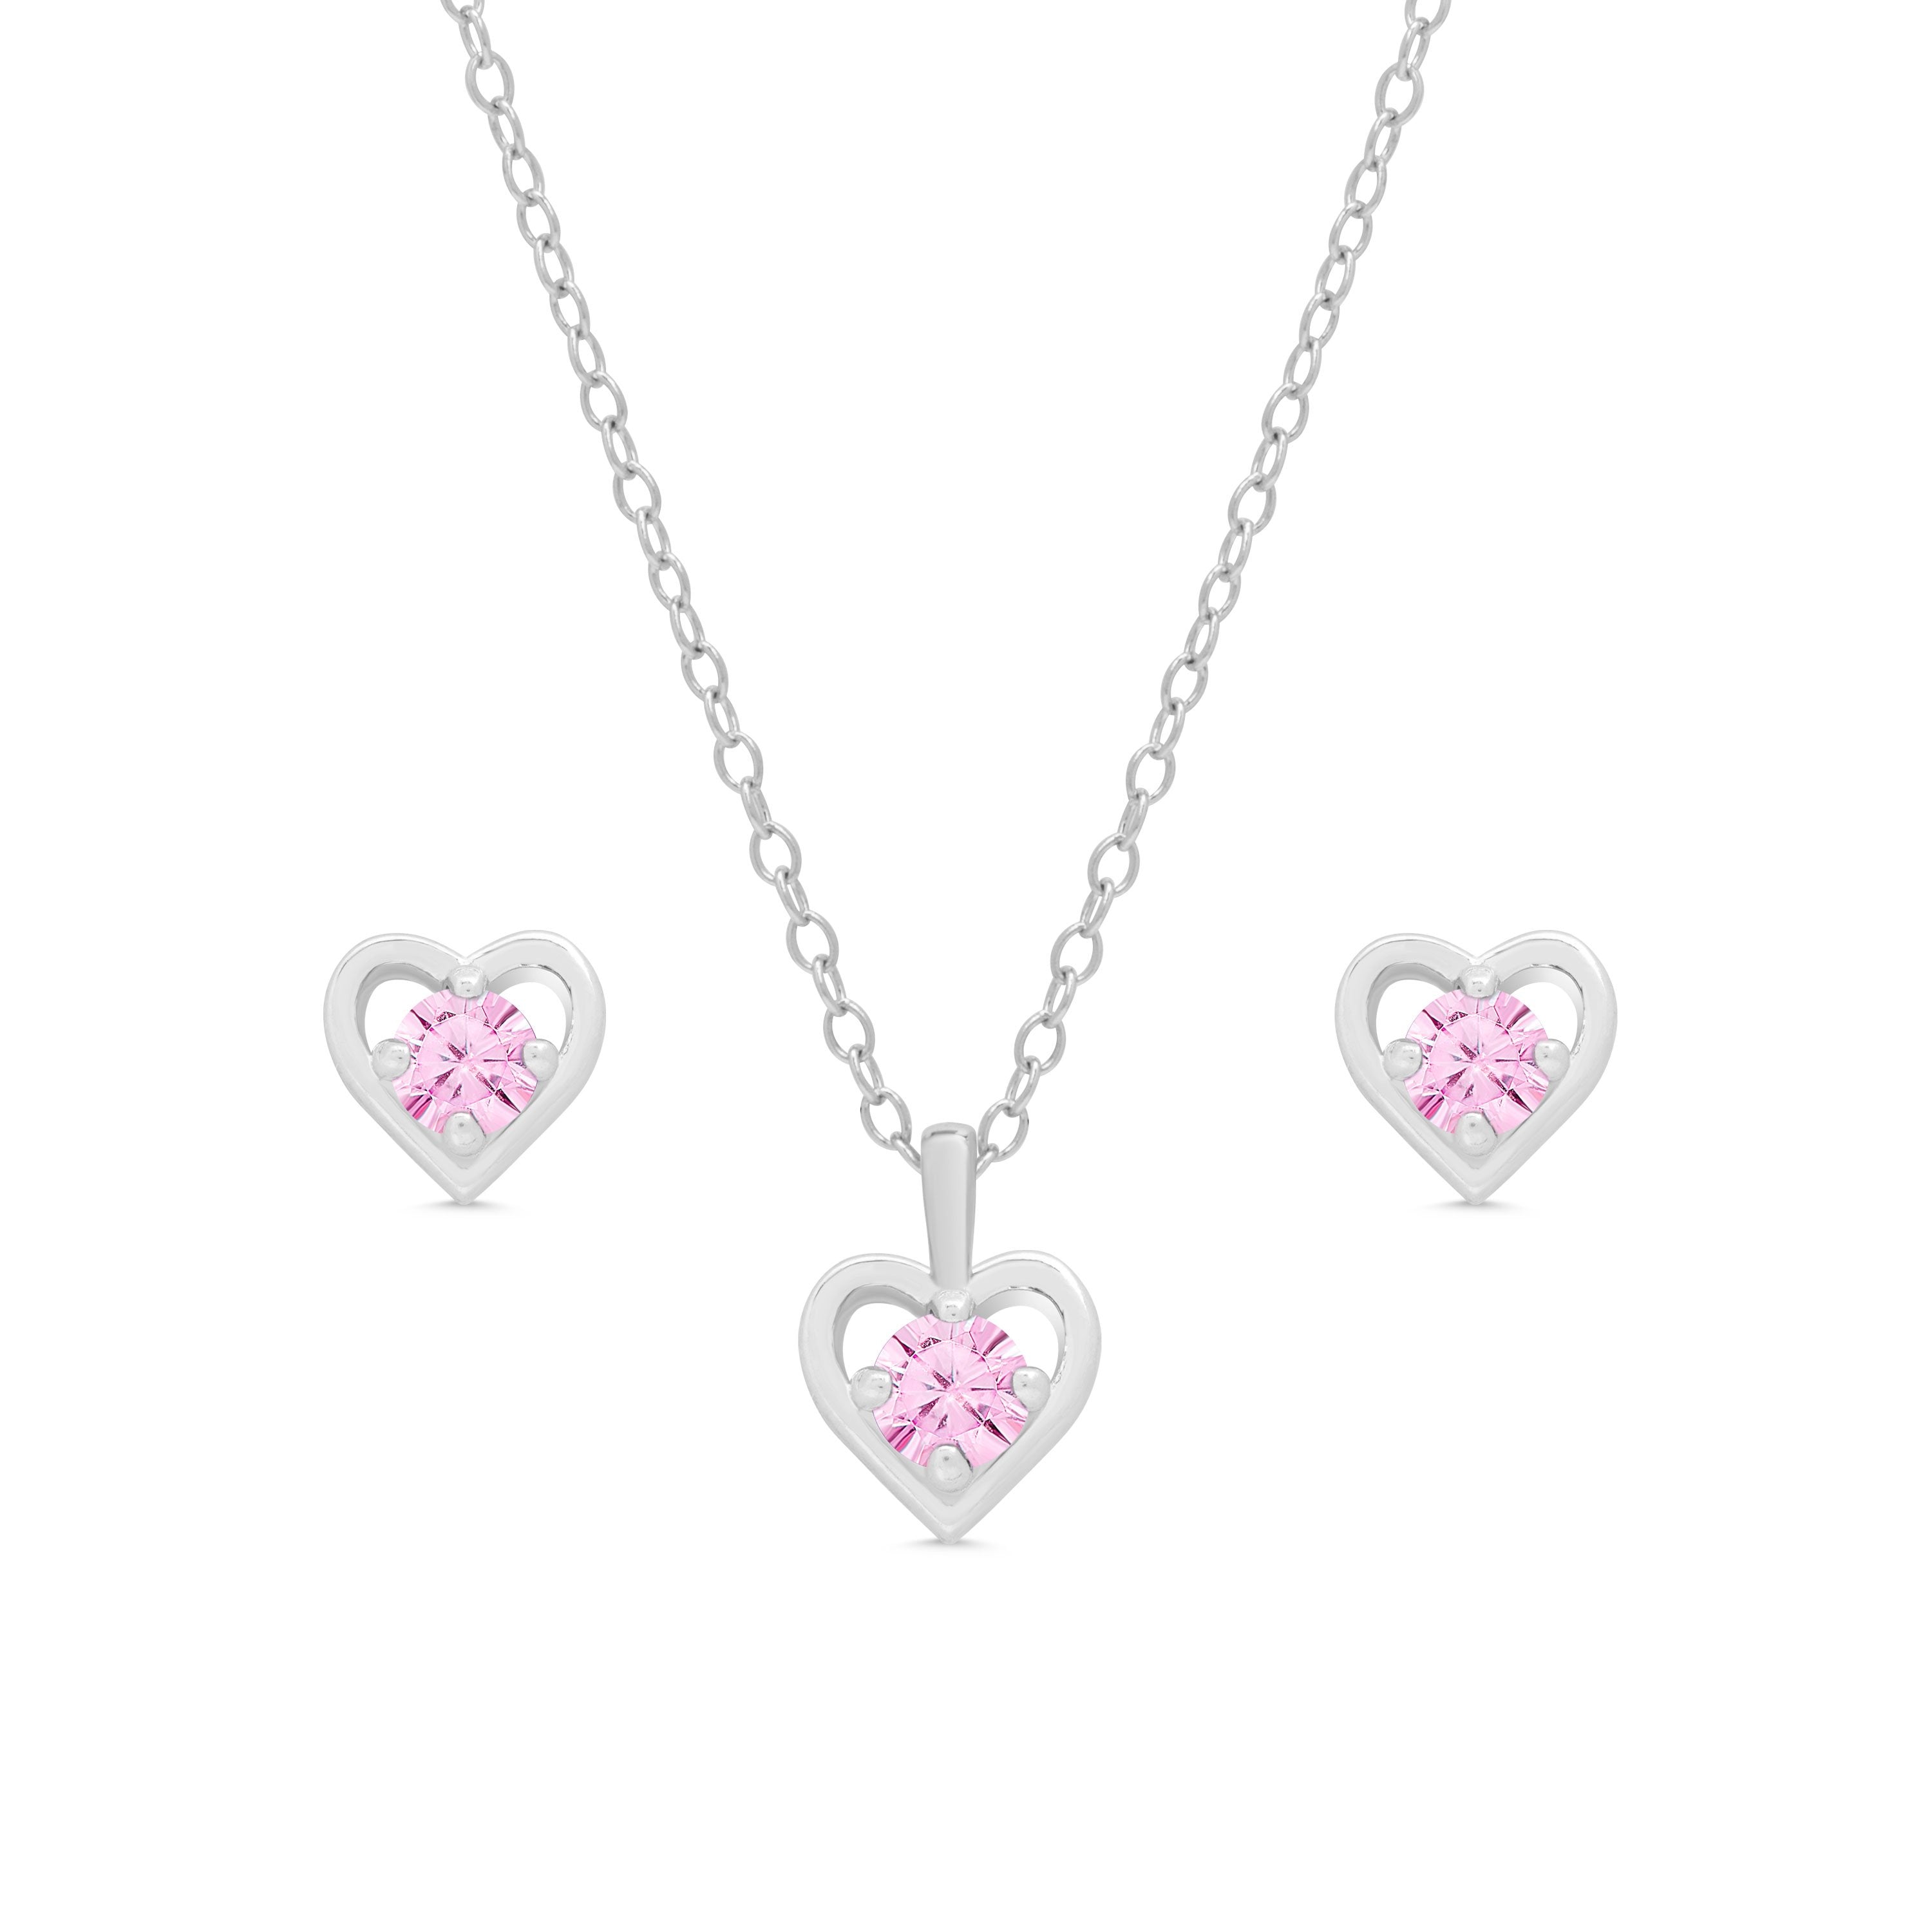 Buy Pink American Diamond Necklace Set Silver Jewellery Set Necklace With  Earrings Indian Jewellery Online in India - Etsy